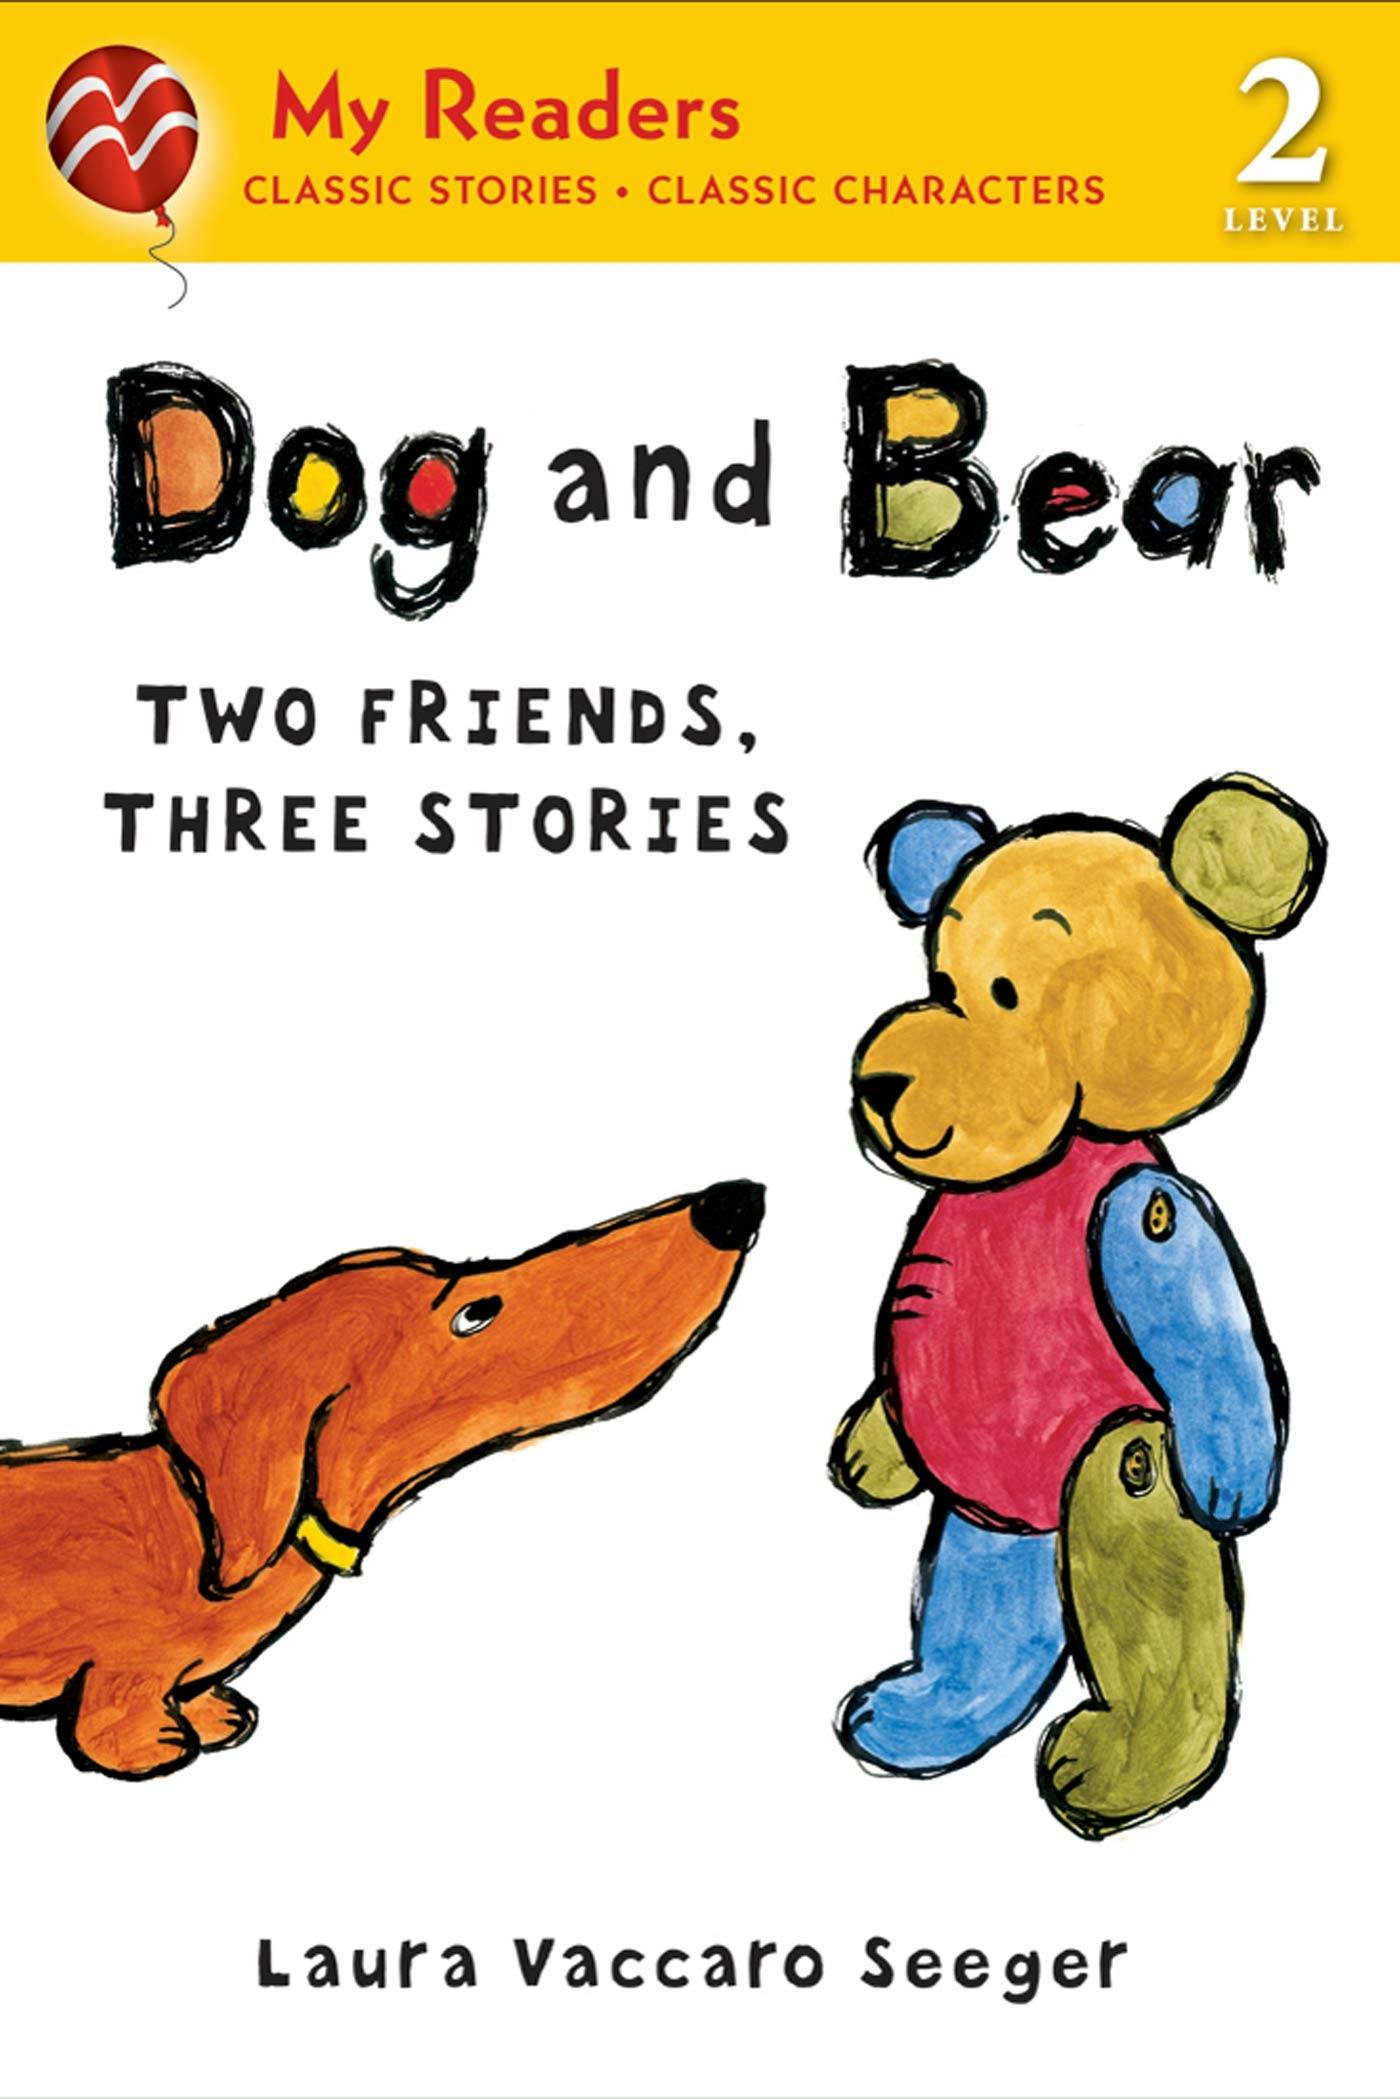 Dog and Bear: Two Friends, Three Stories